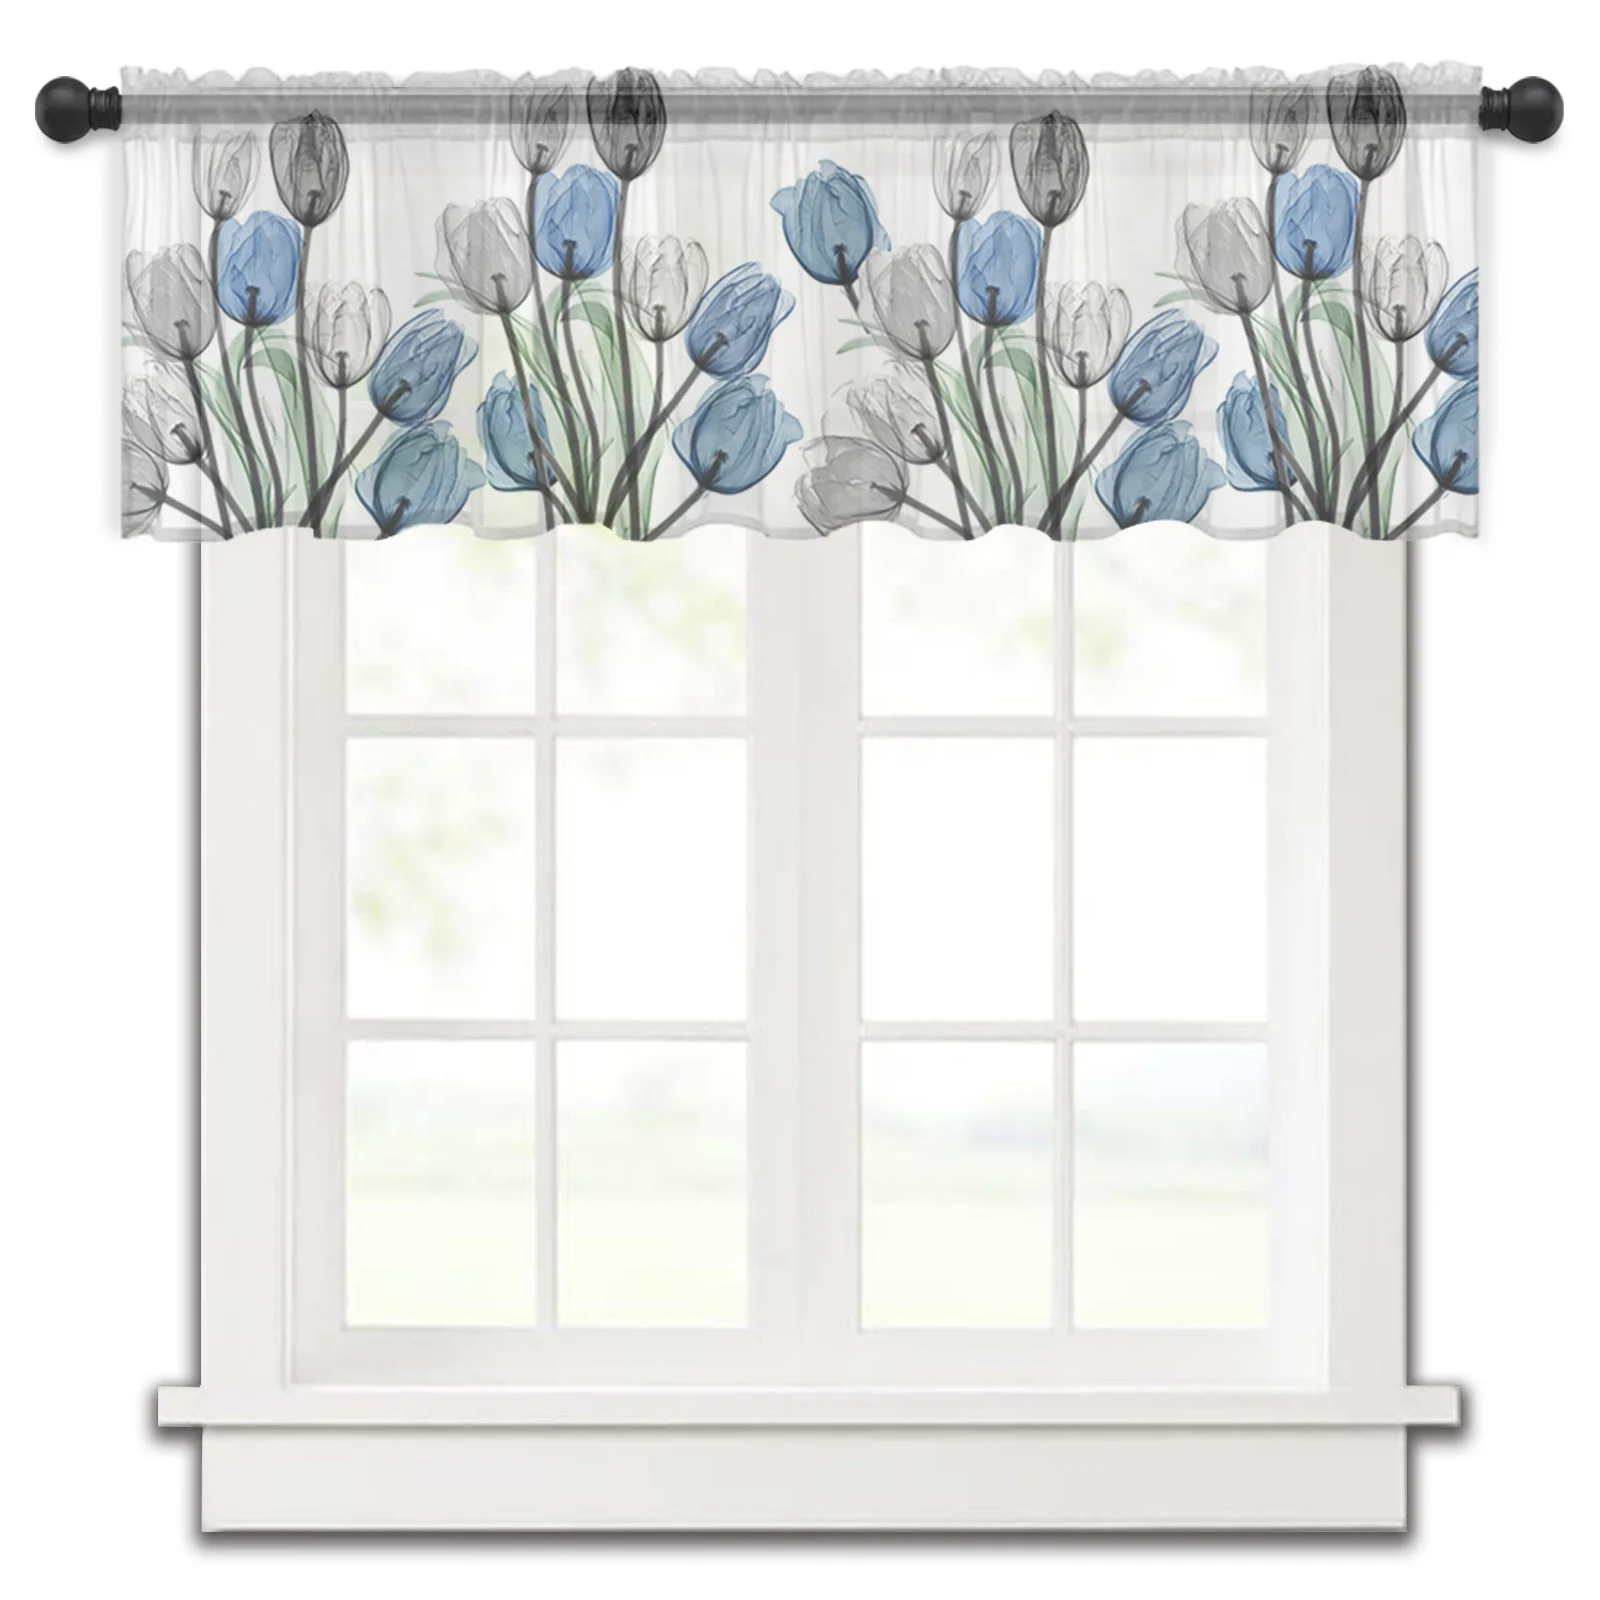 

Flower Idyllic Grey Blue Tulip Kitchen Small Curtain Tulle Sheer Short Curtain Bedroom Living Room Home Decor Voile Drapes